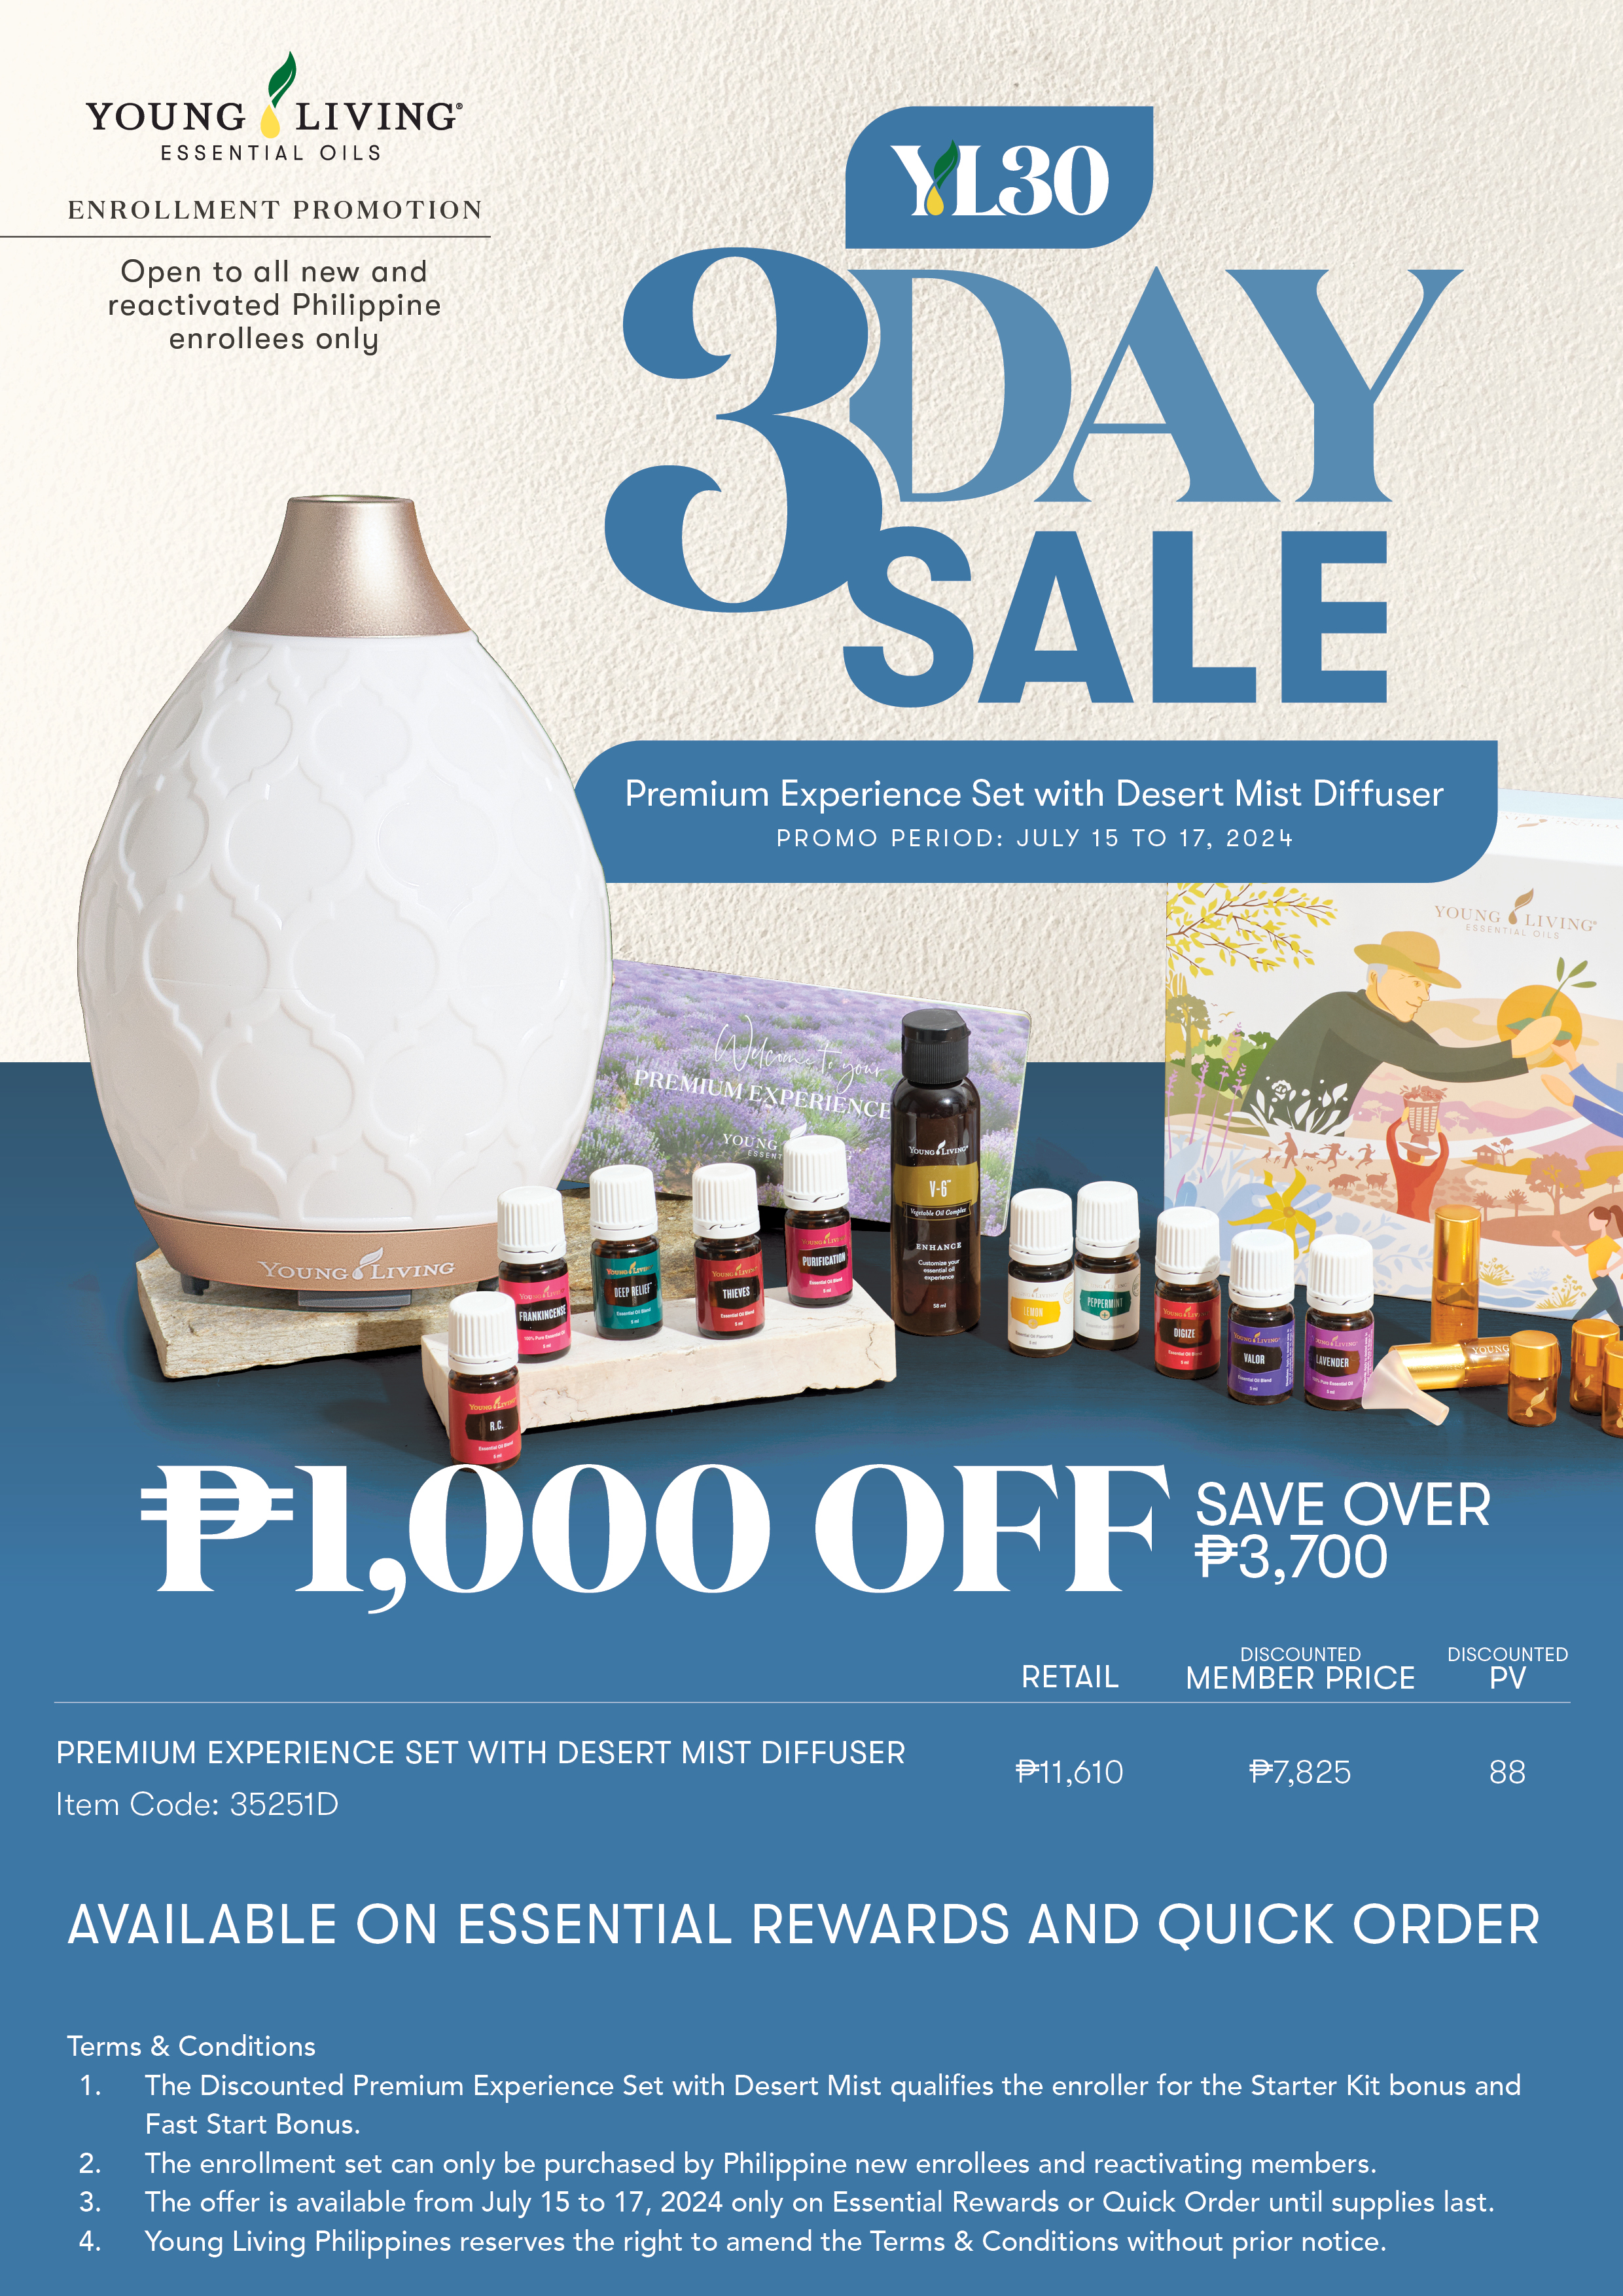 3-Day Sale